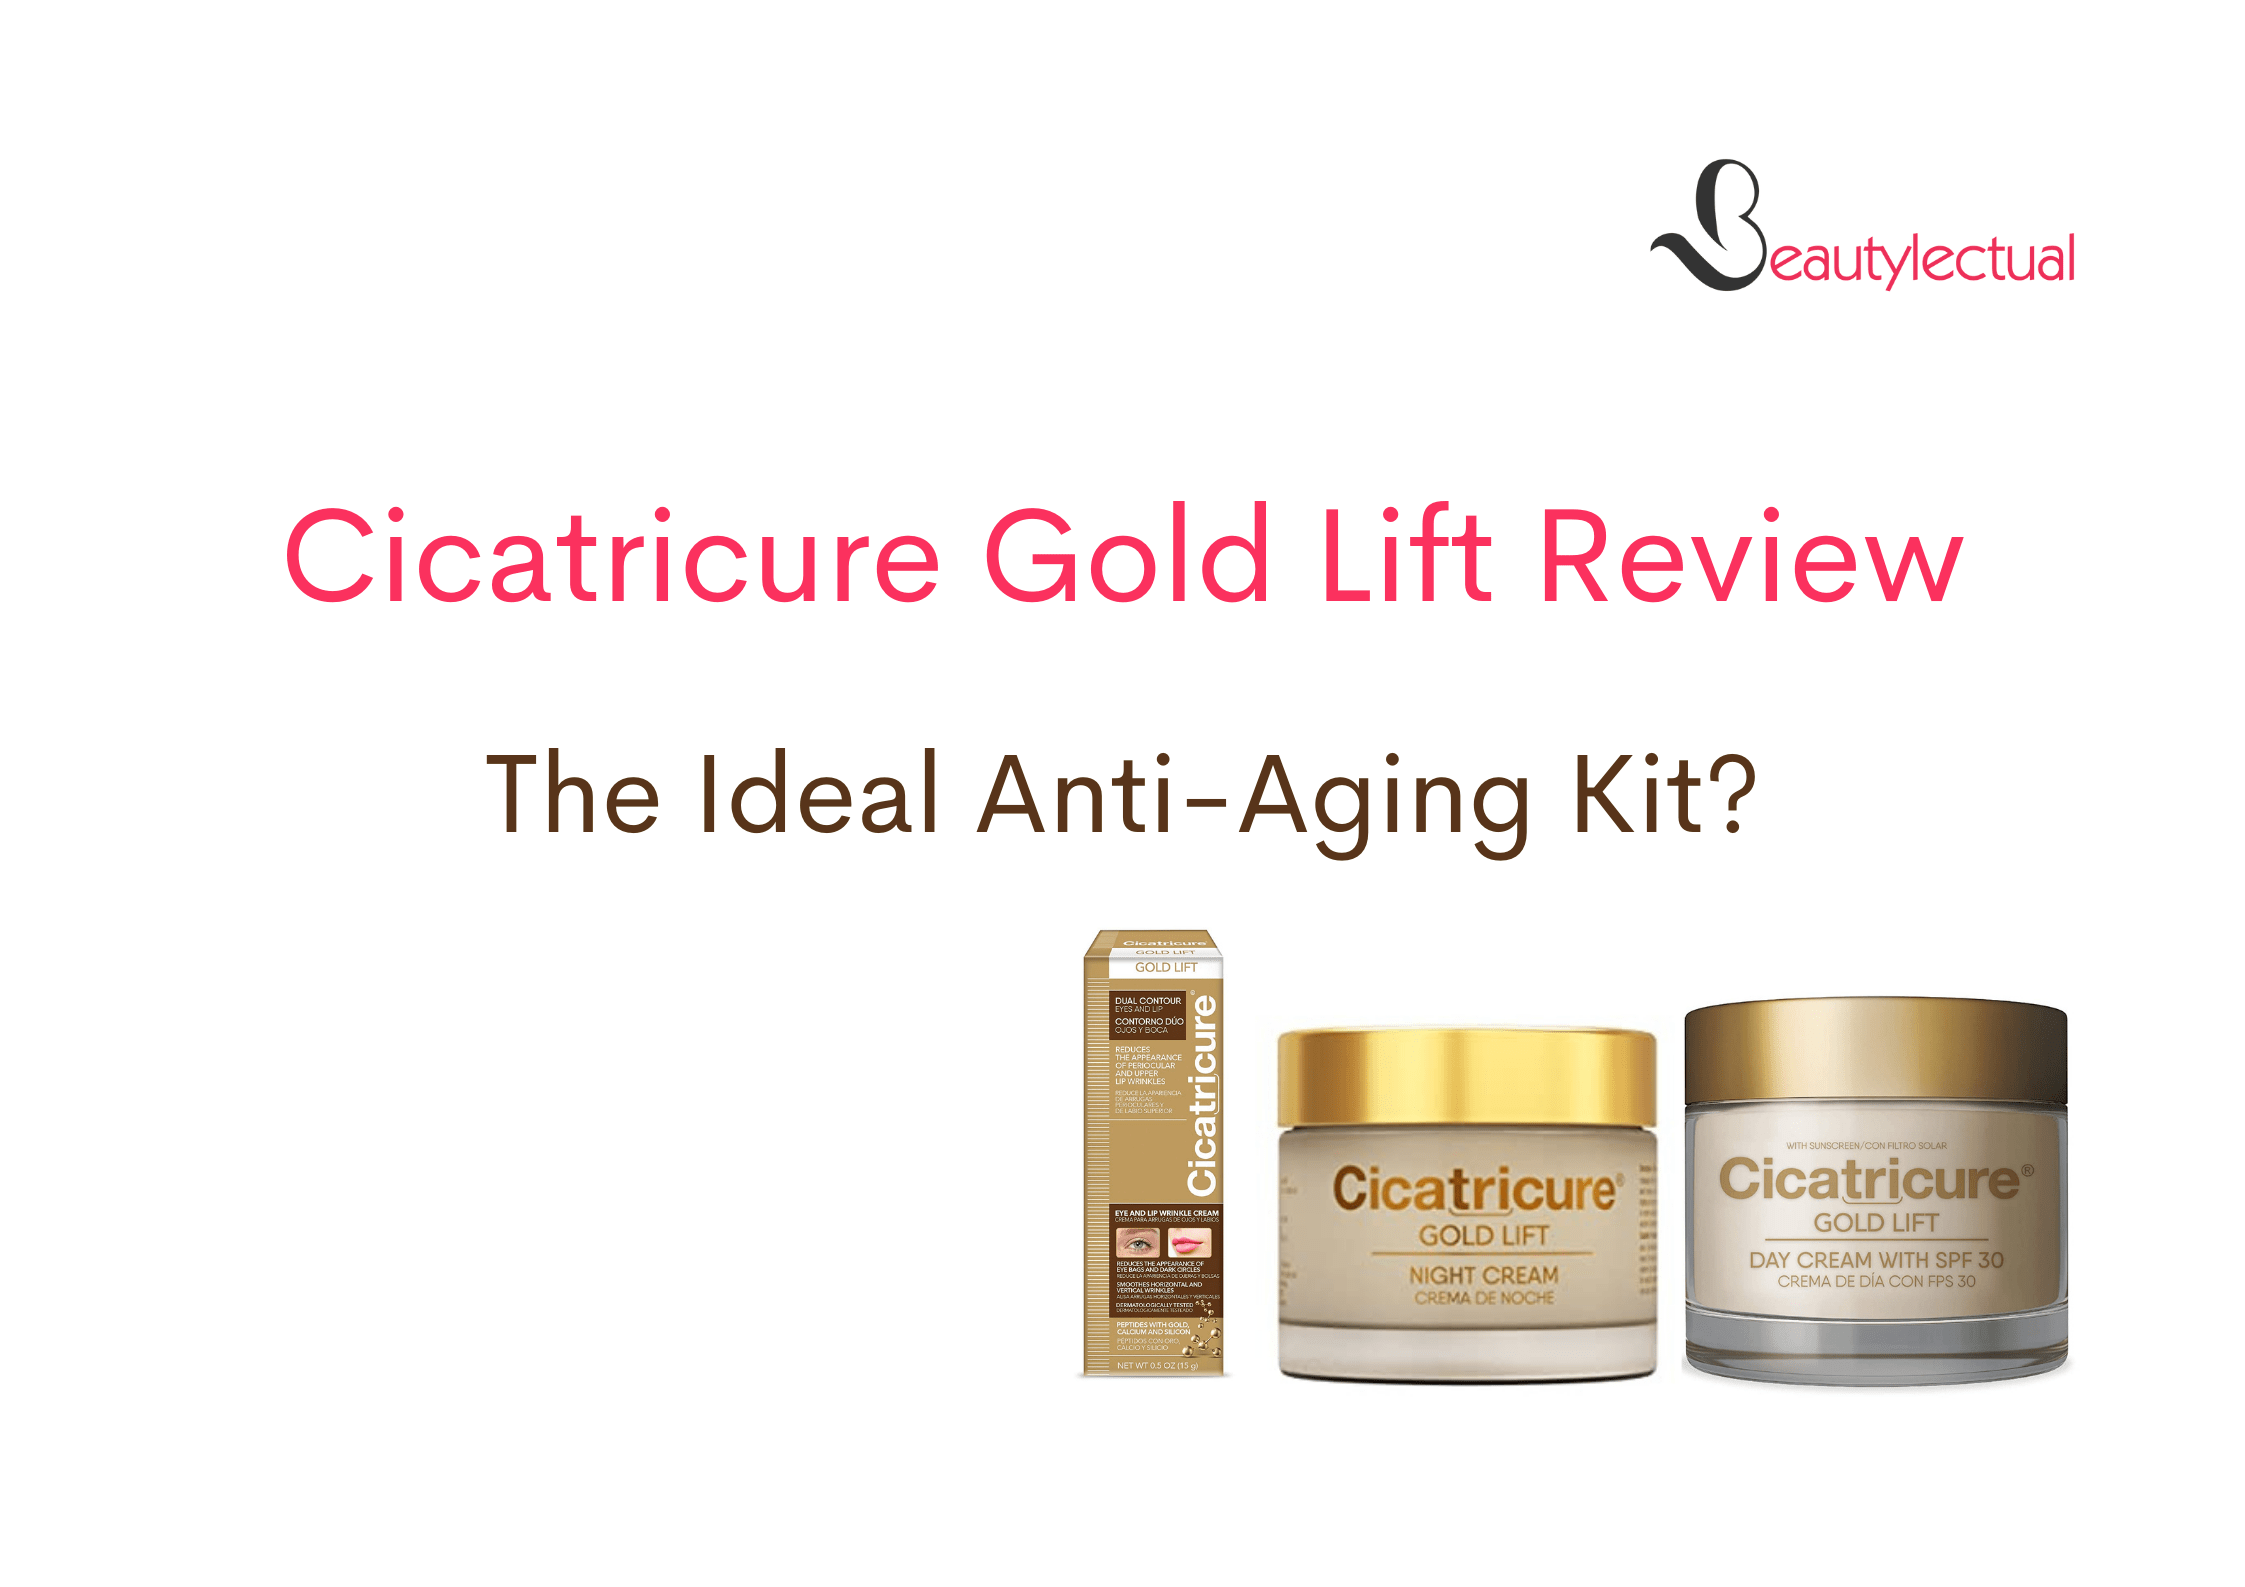 Cicatricure Gold Lift Review